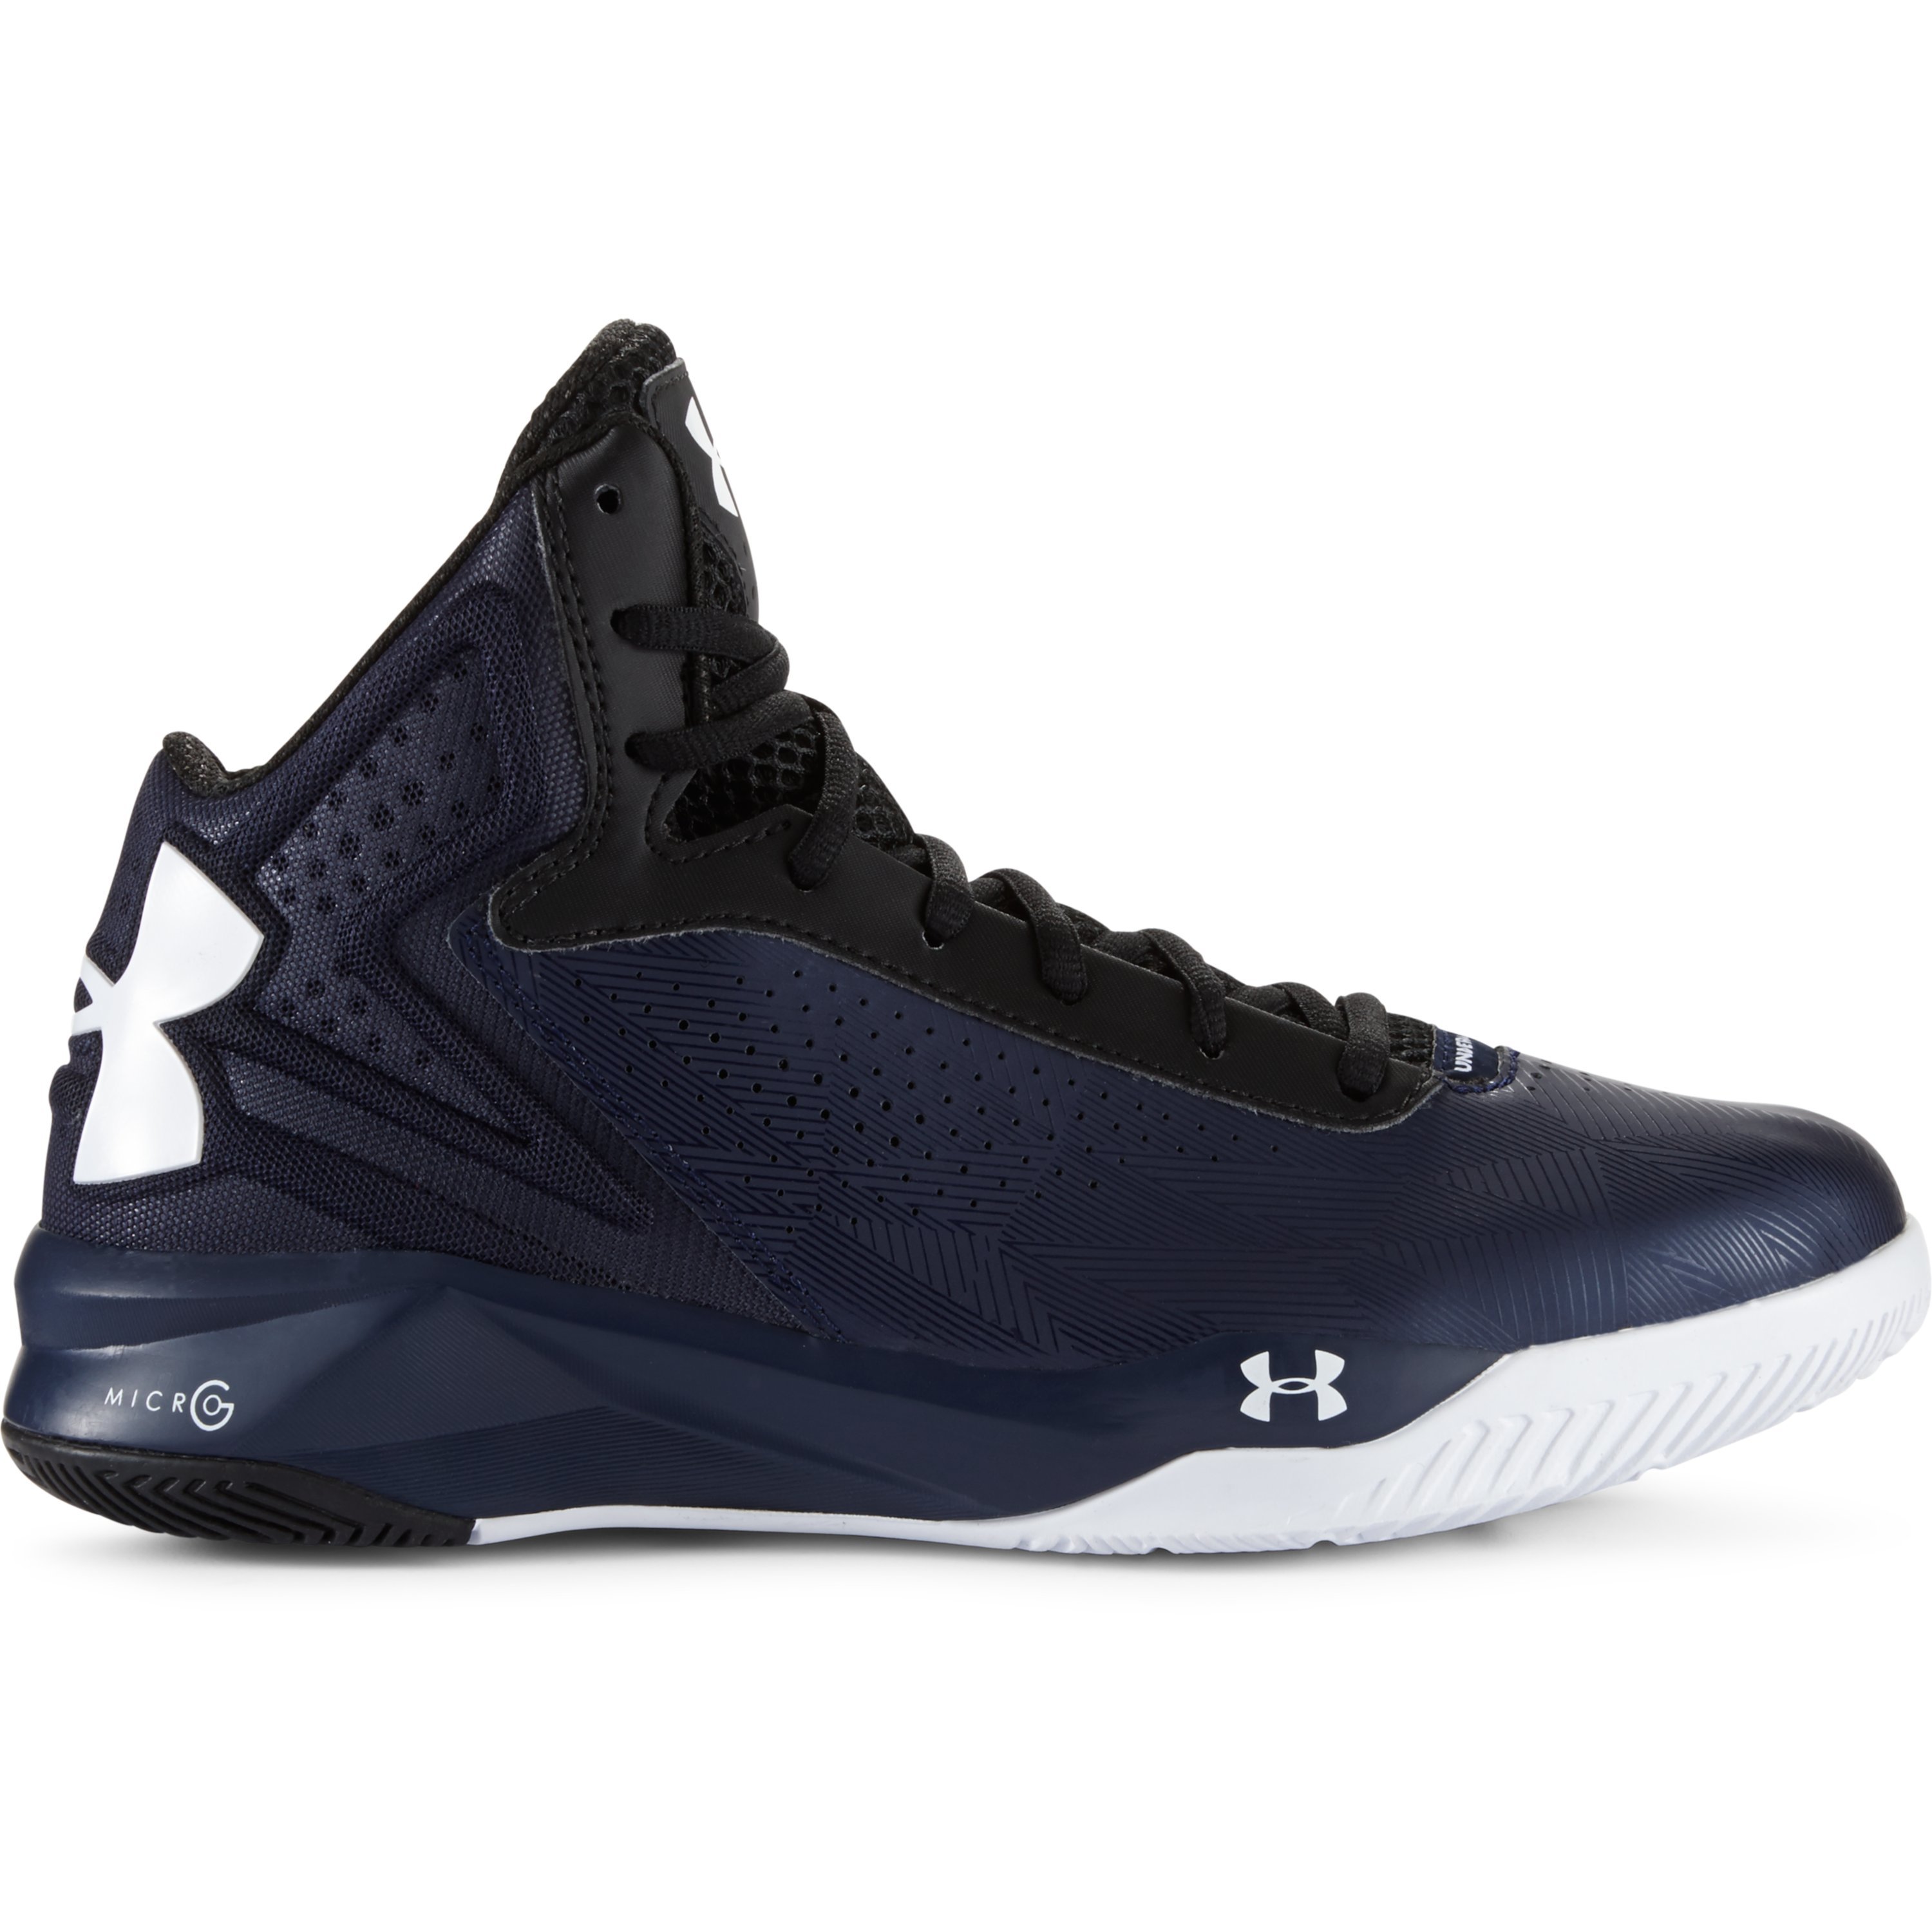 Under Armour Synthetic Women's Ua Micro G® Torch Basketball Shoes in ...